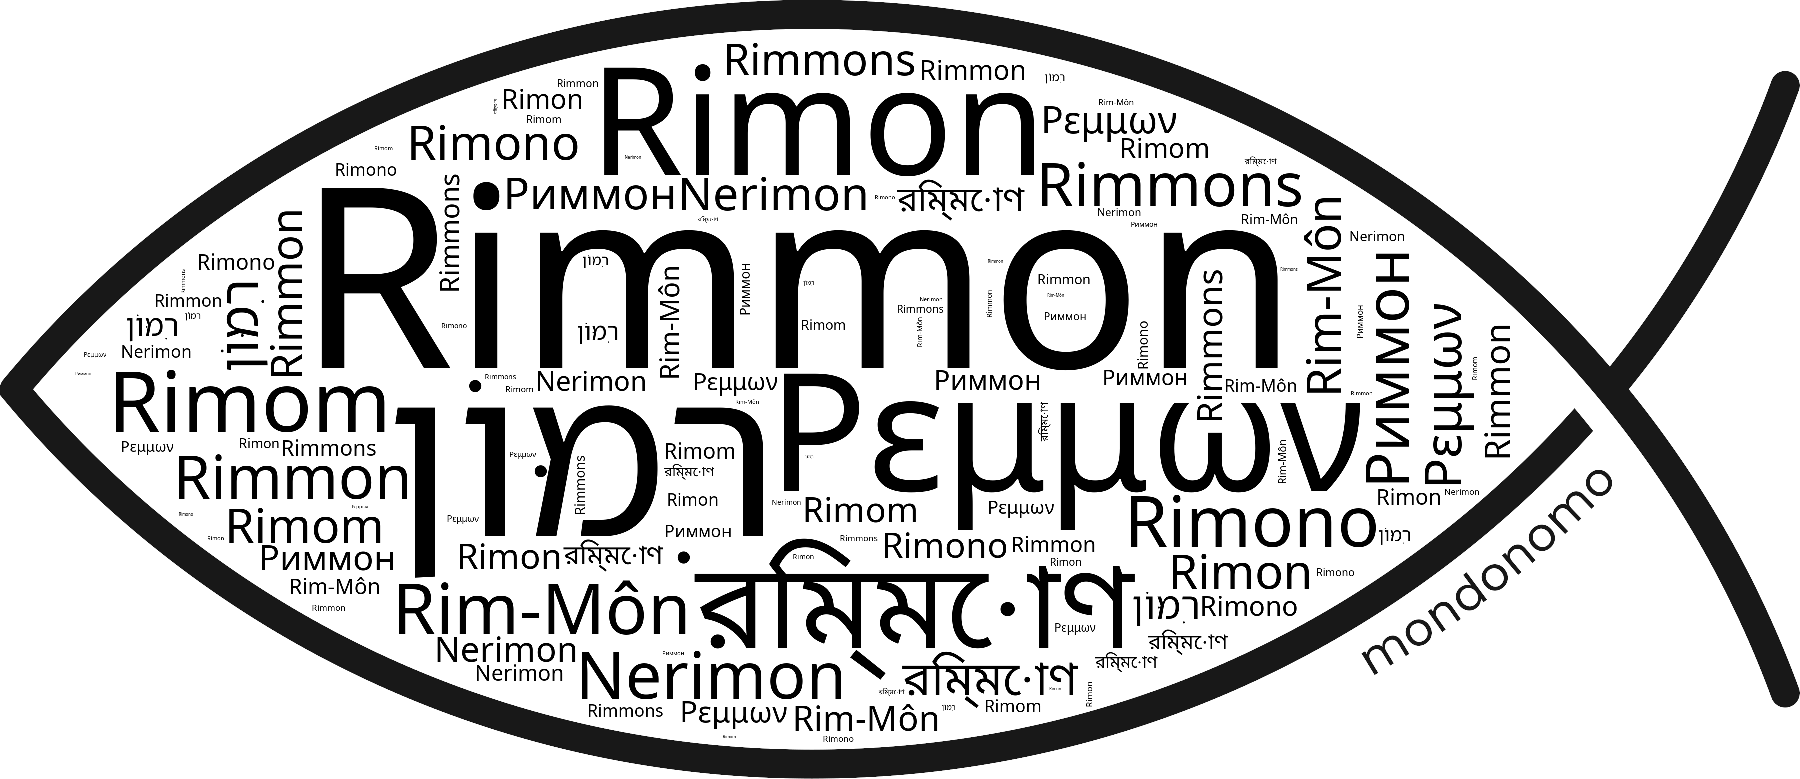 Name Rimmon in the world's Bibles